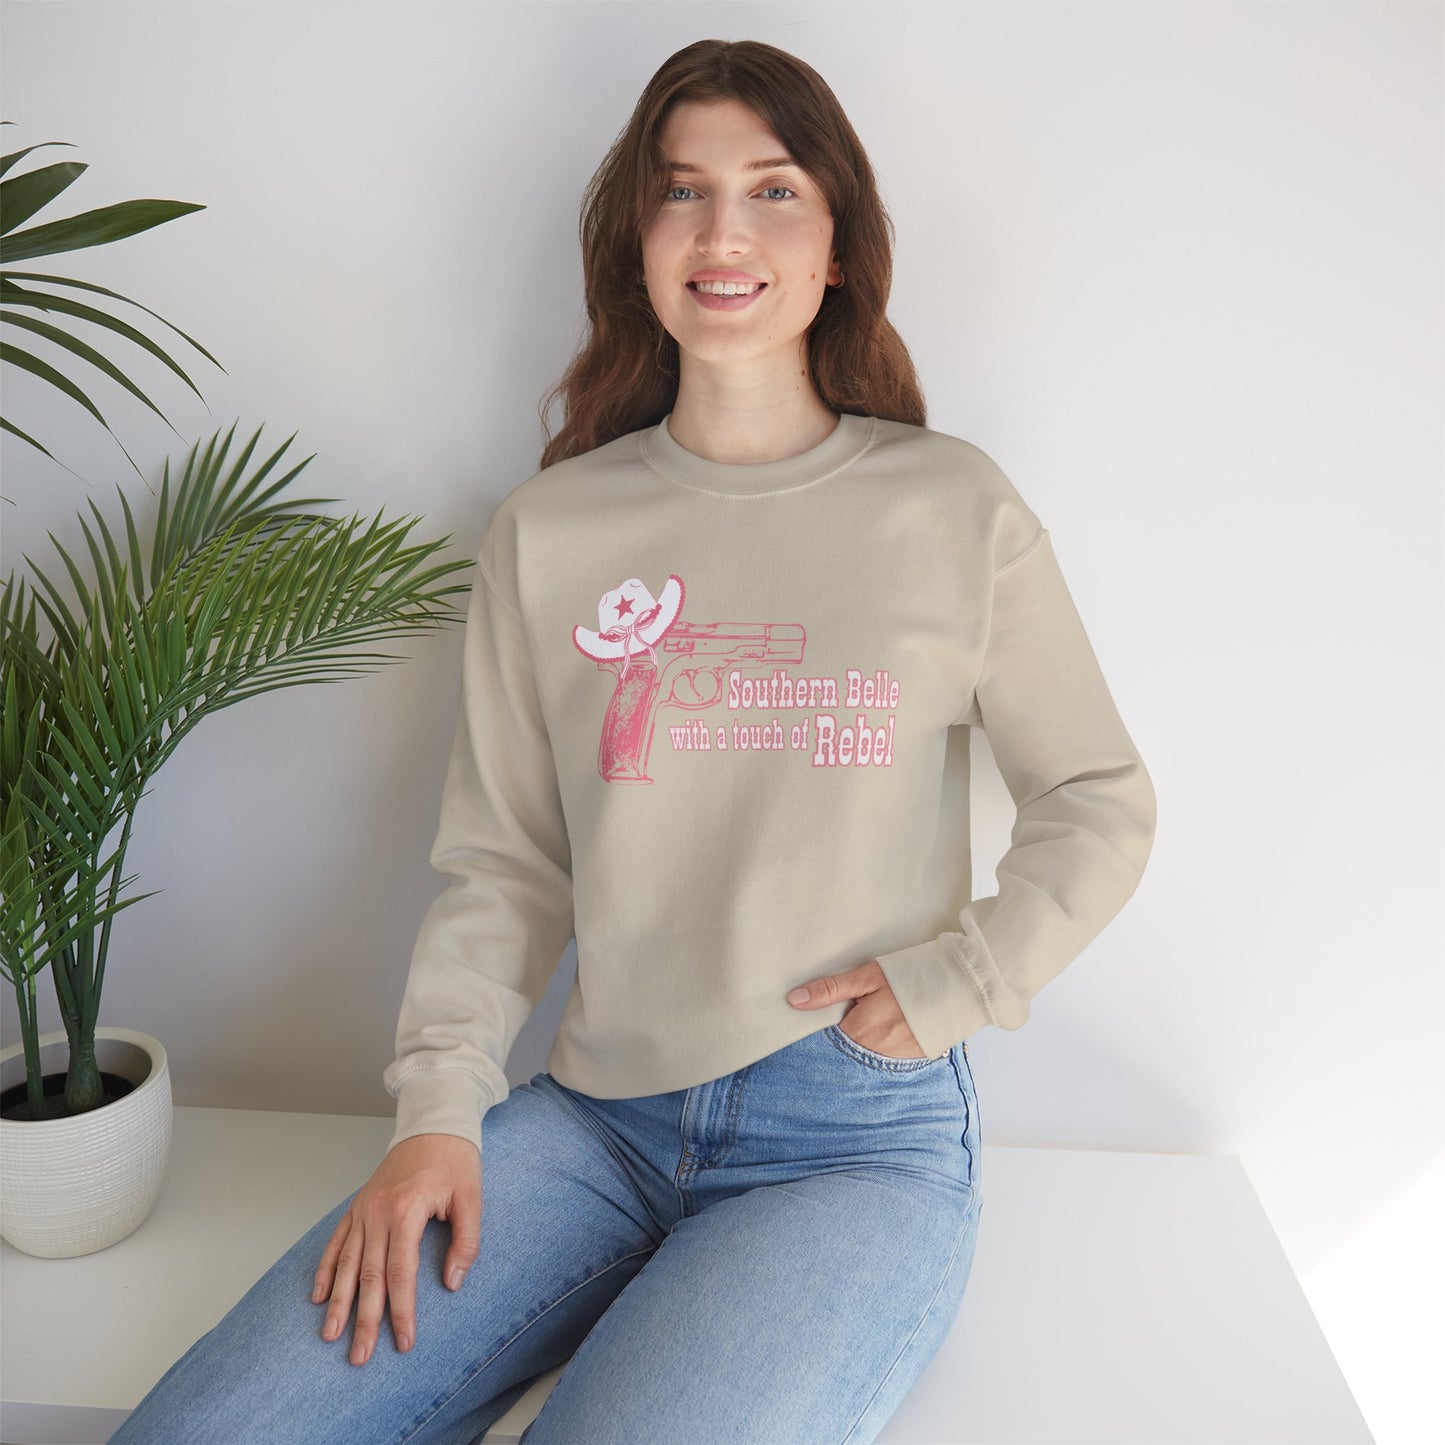 Southern Belle With A Touch Of Rebel Crewneck Sweatshirt Sand